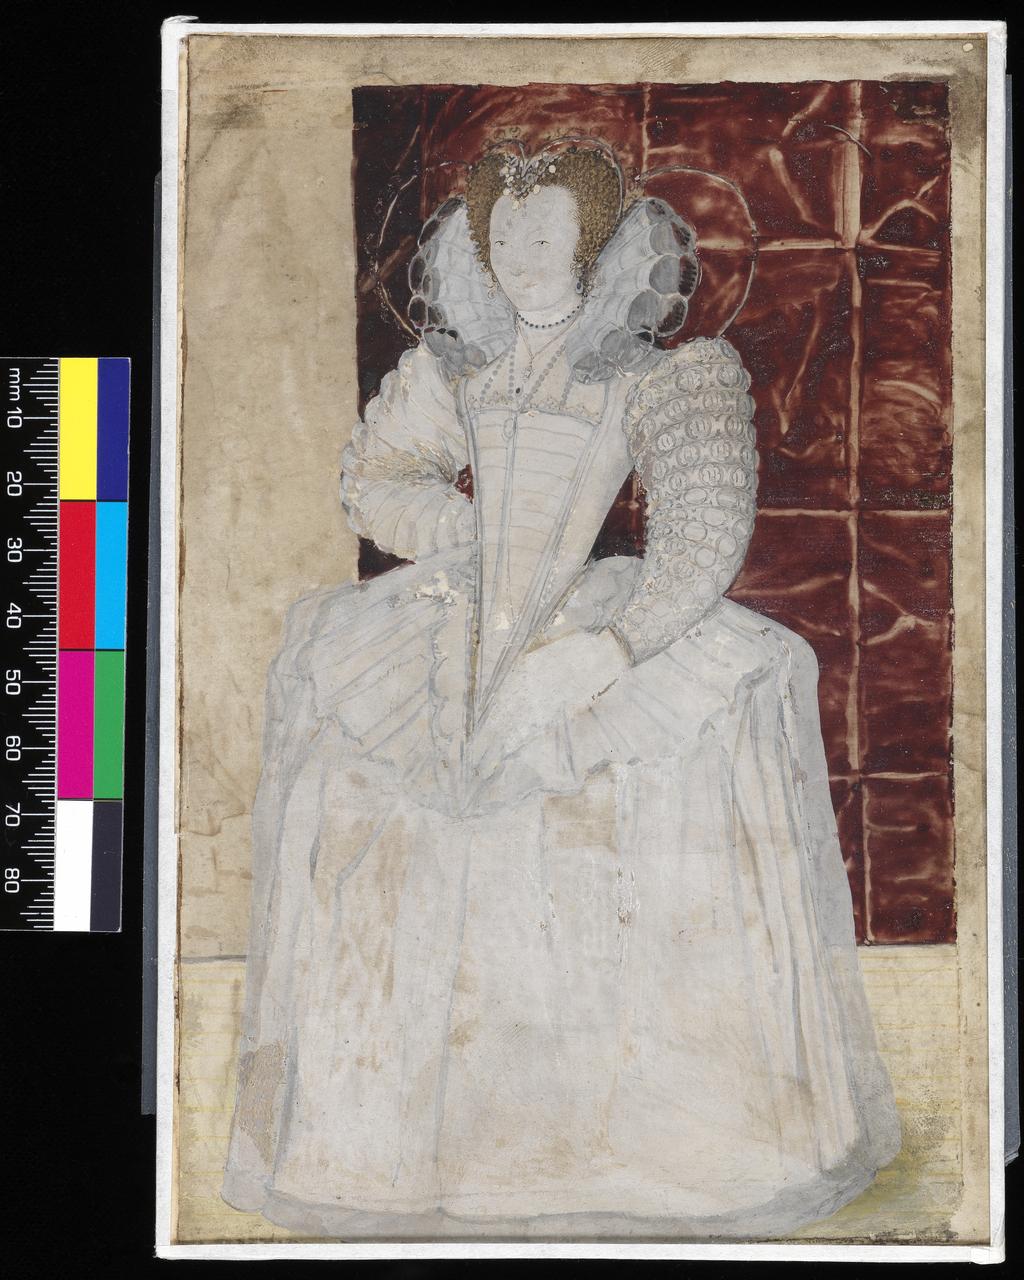 An image of Unknown Lady. Hilliard, Nicholas (British, 1537-1619). Watercolour on vellum, which has been relaid on modern card, height 182 mm, width 122 mm, circa 1595.